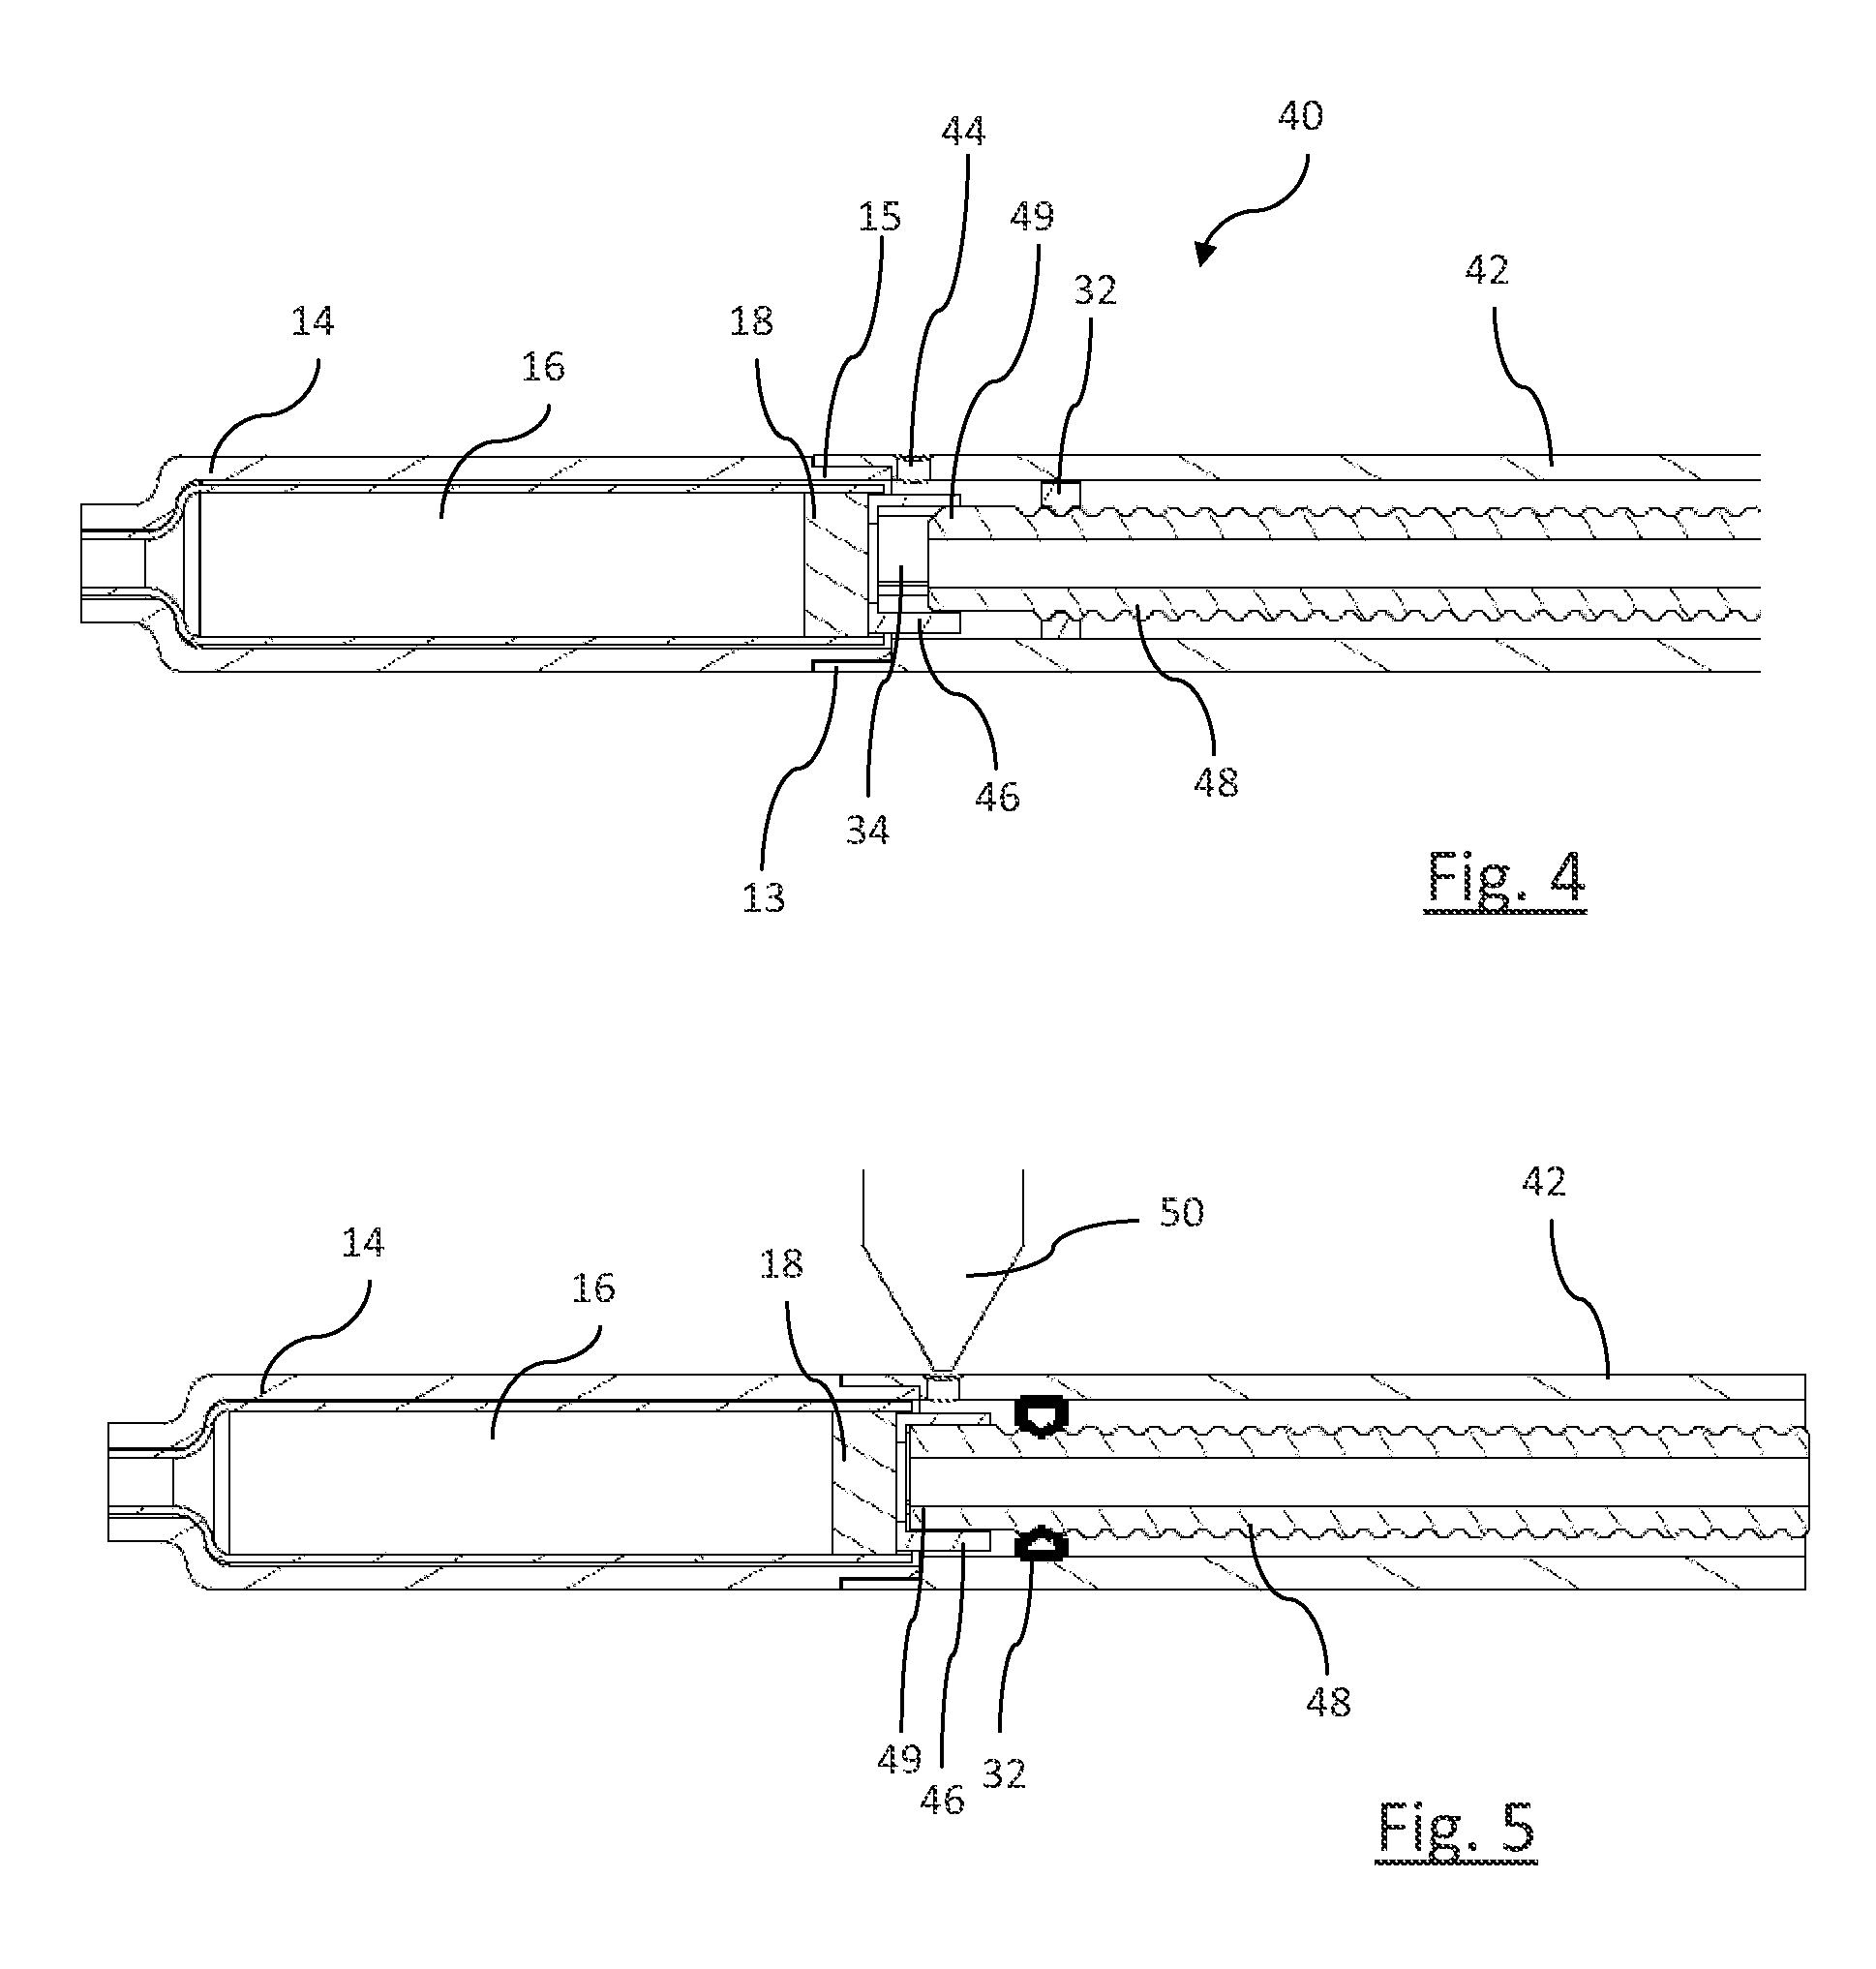 Drive mechanism for a drug delivery device